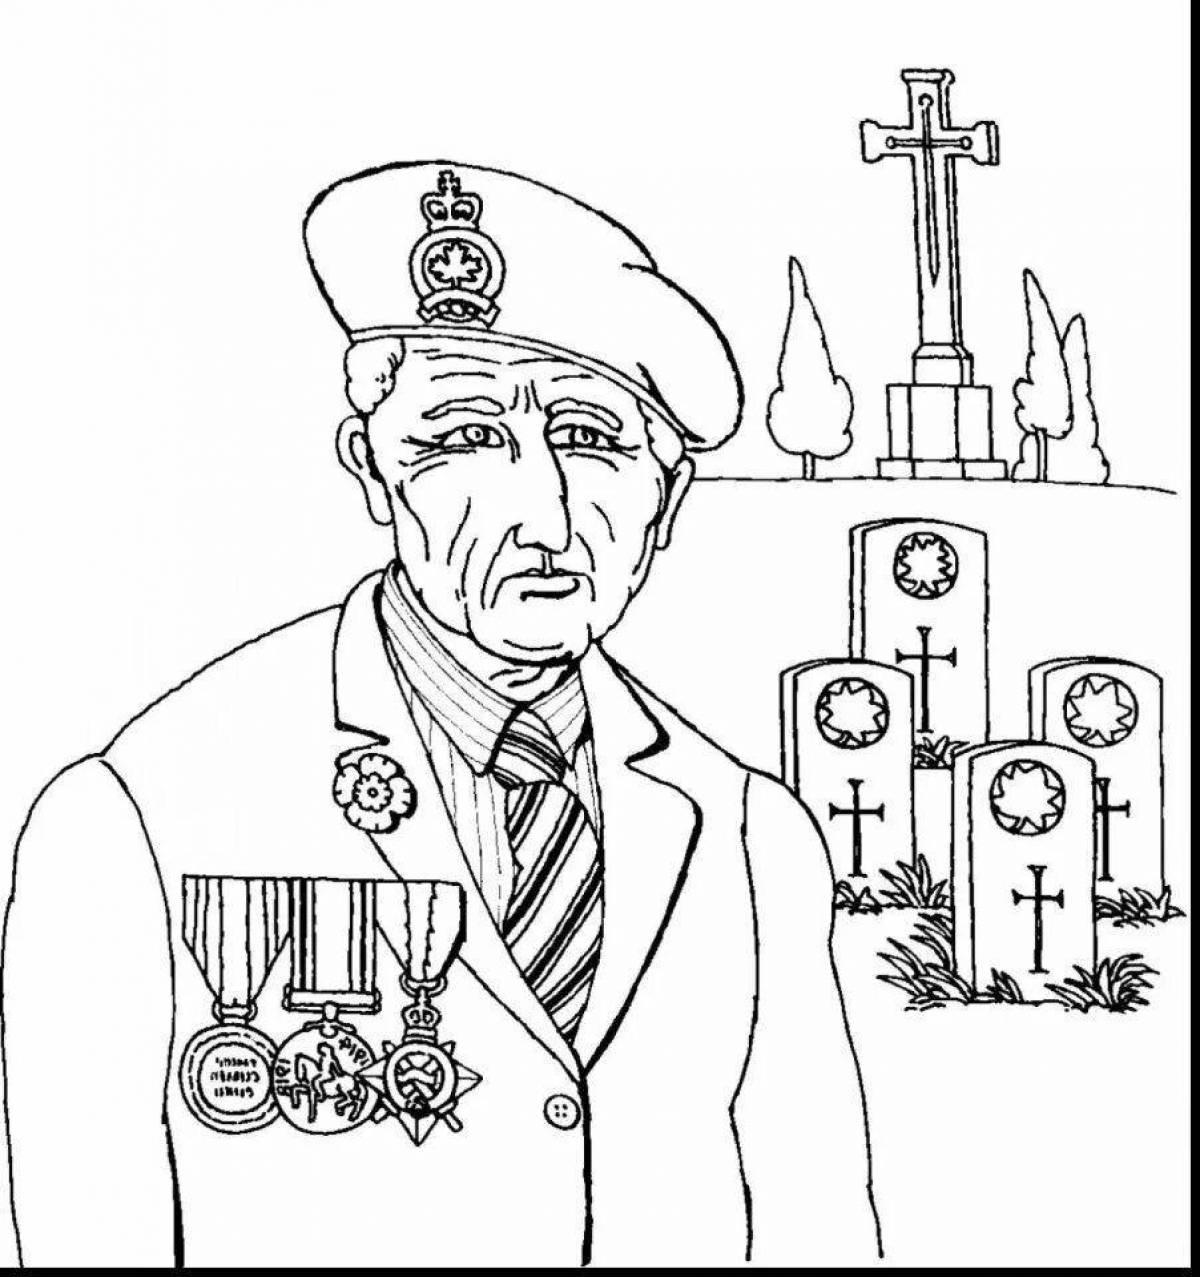 Coloring book brave heroes of the second world war